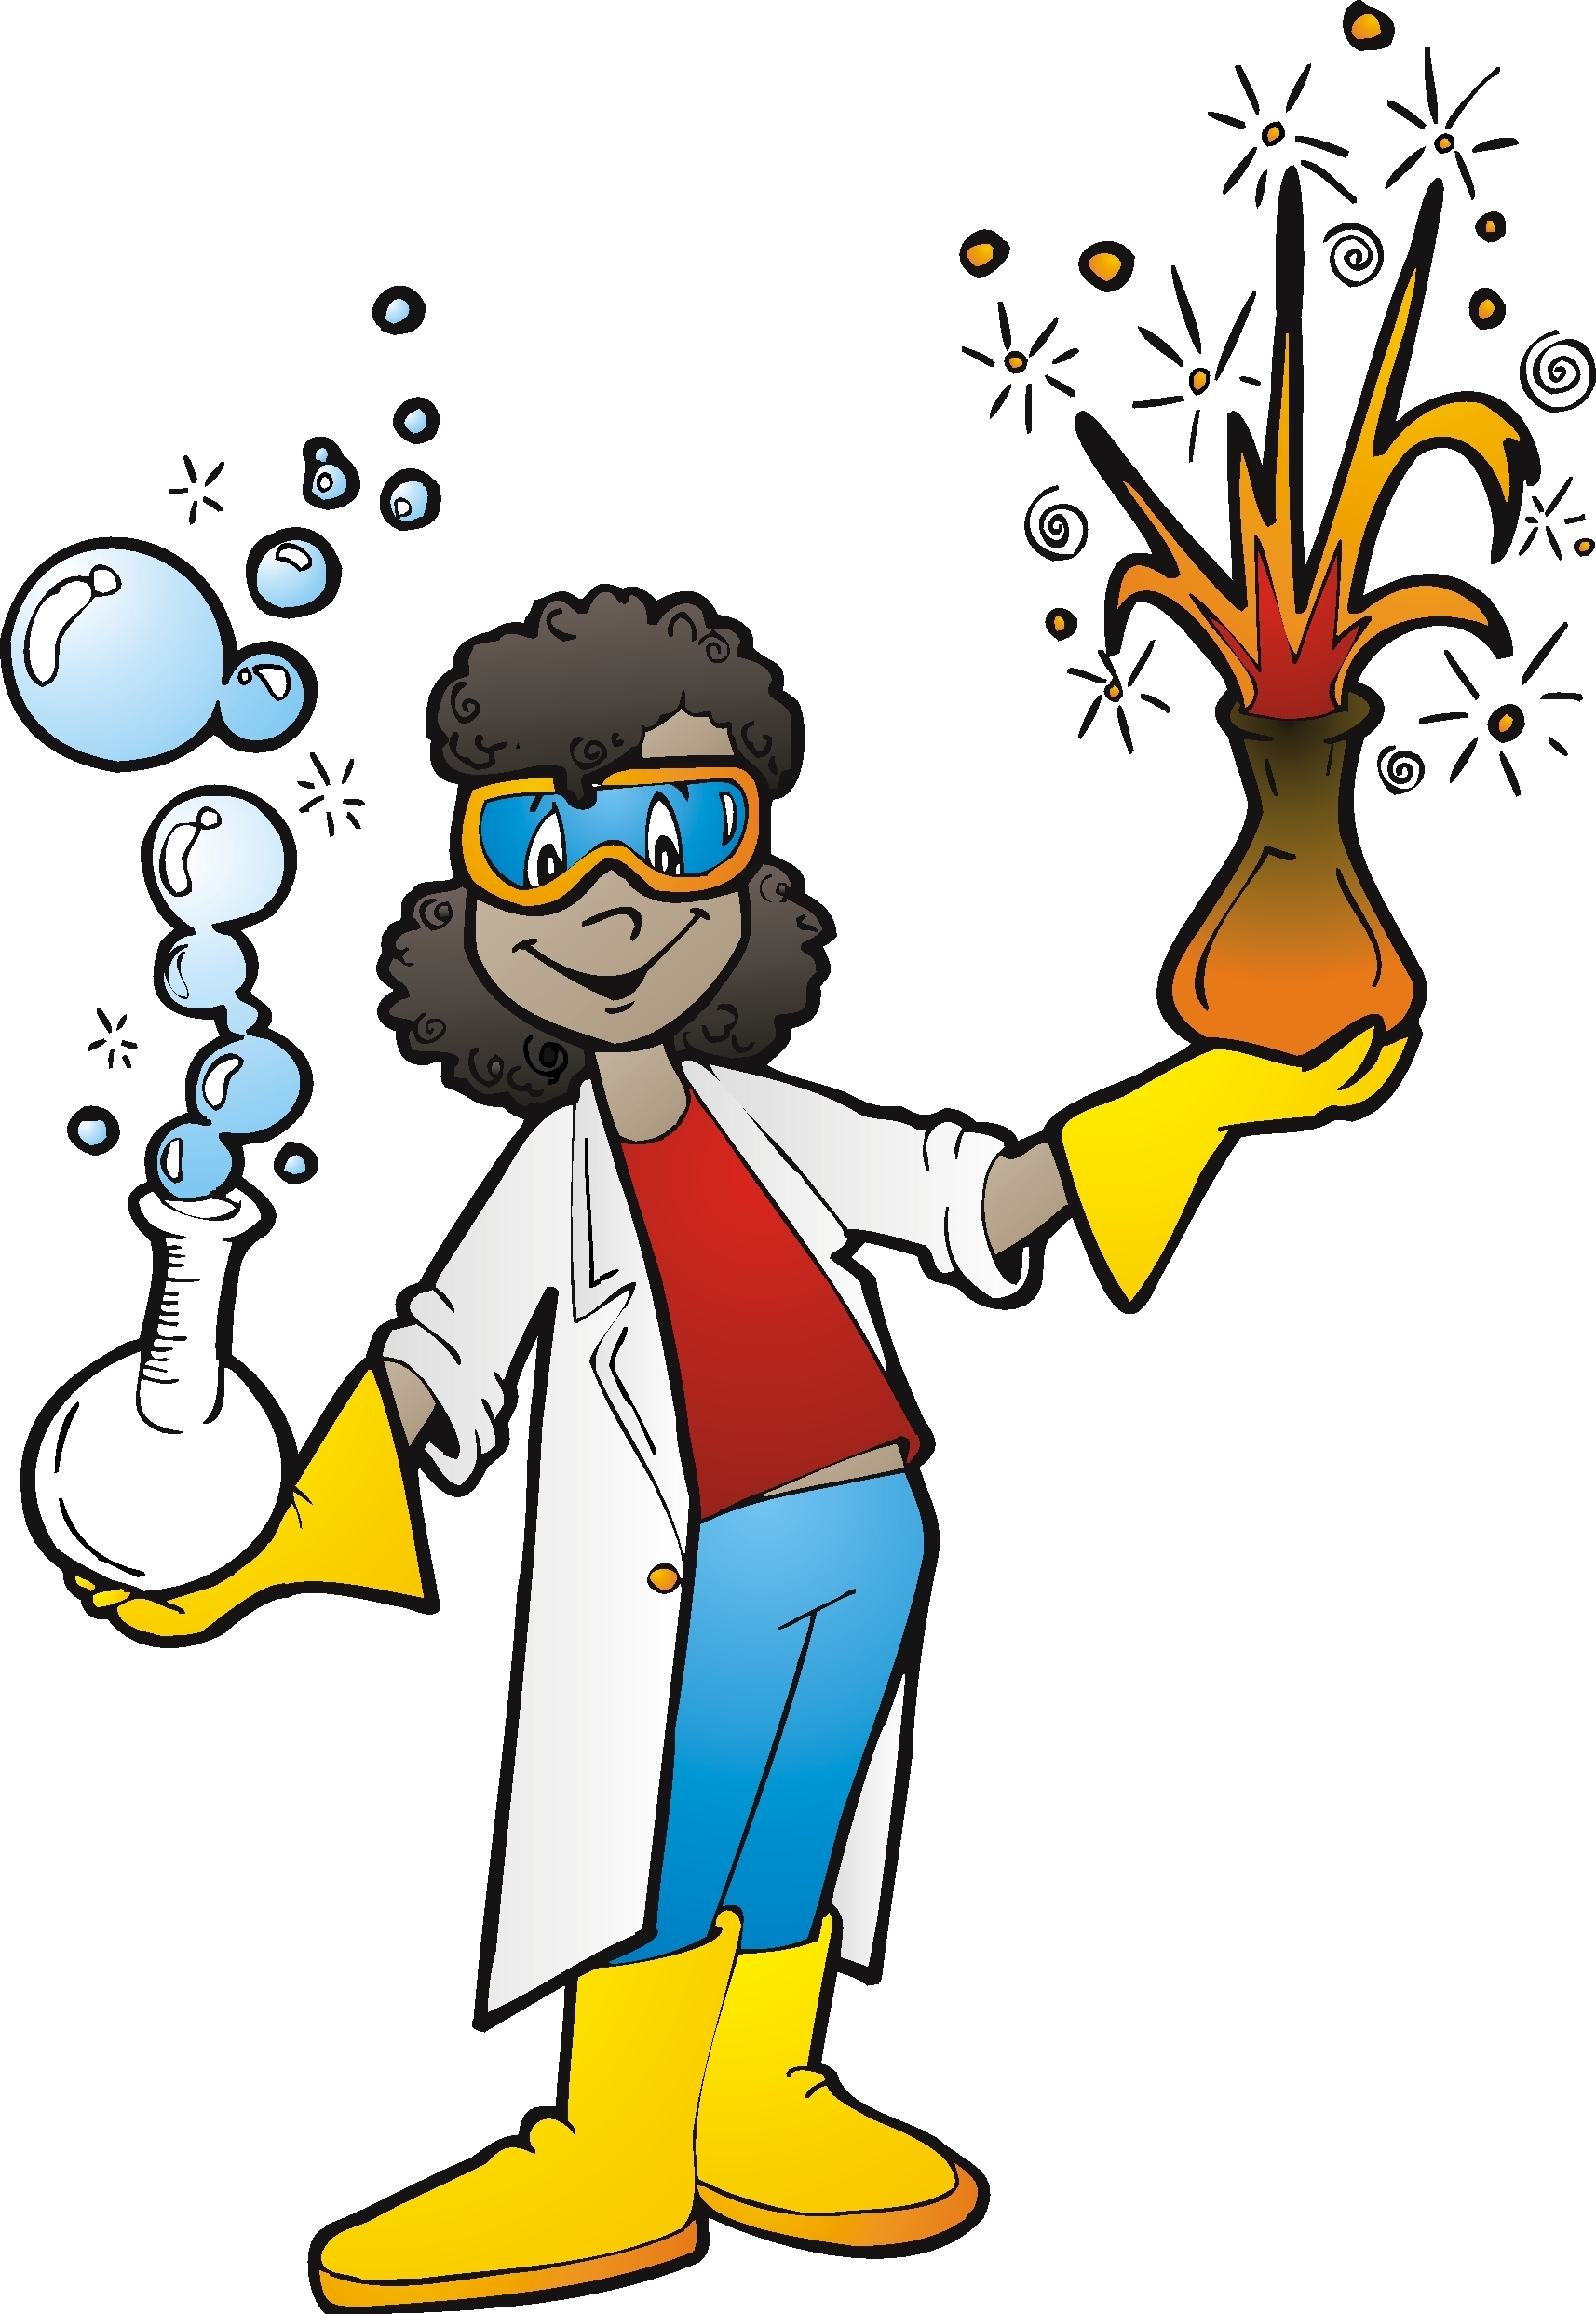 clipart science motion